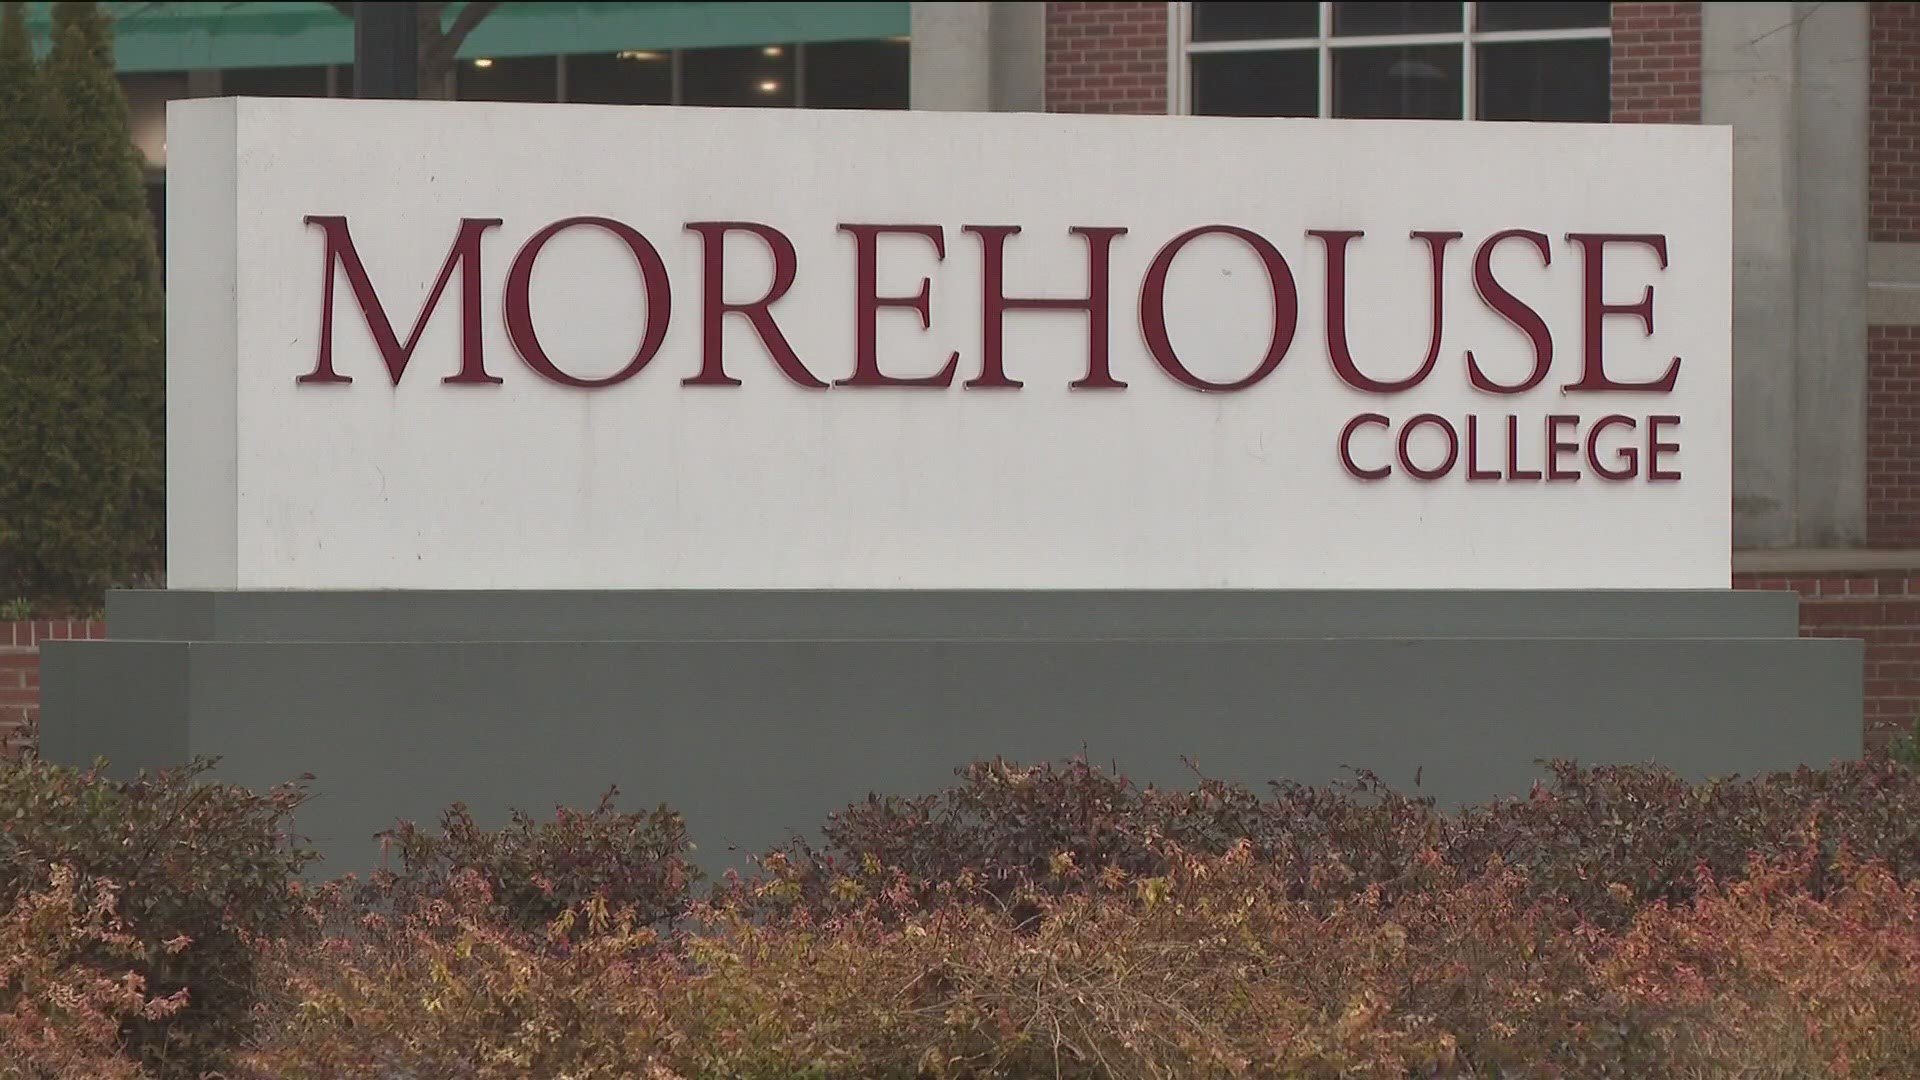 Students from Spelman College and Morehouse said the facility is against their values.